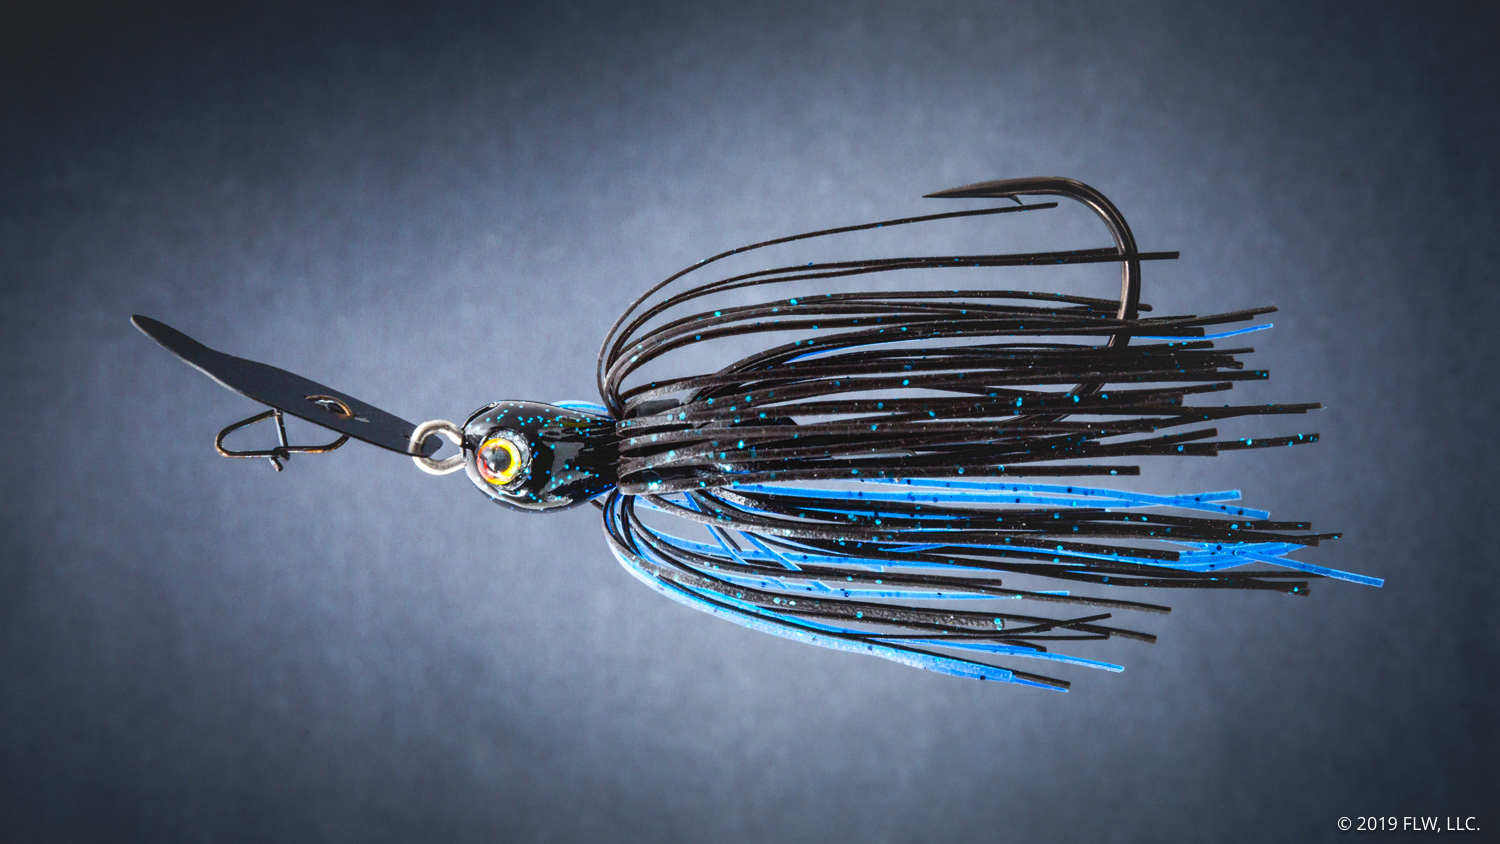 The Best Fishing Lures and Flies in 2020: Rapala, Yamamoto, and More